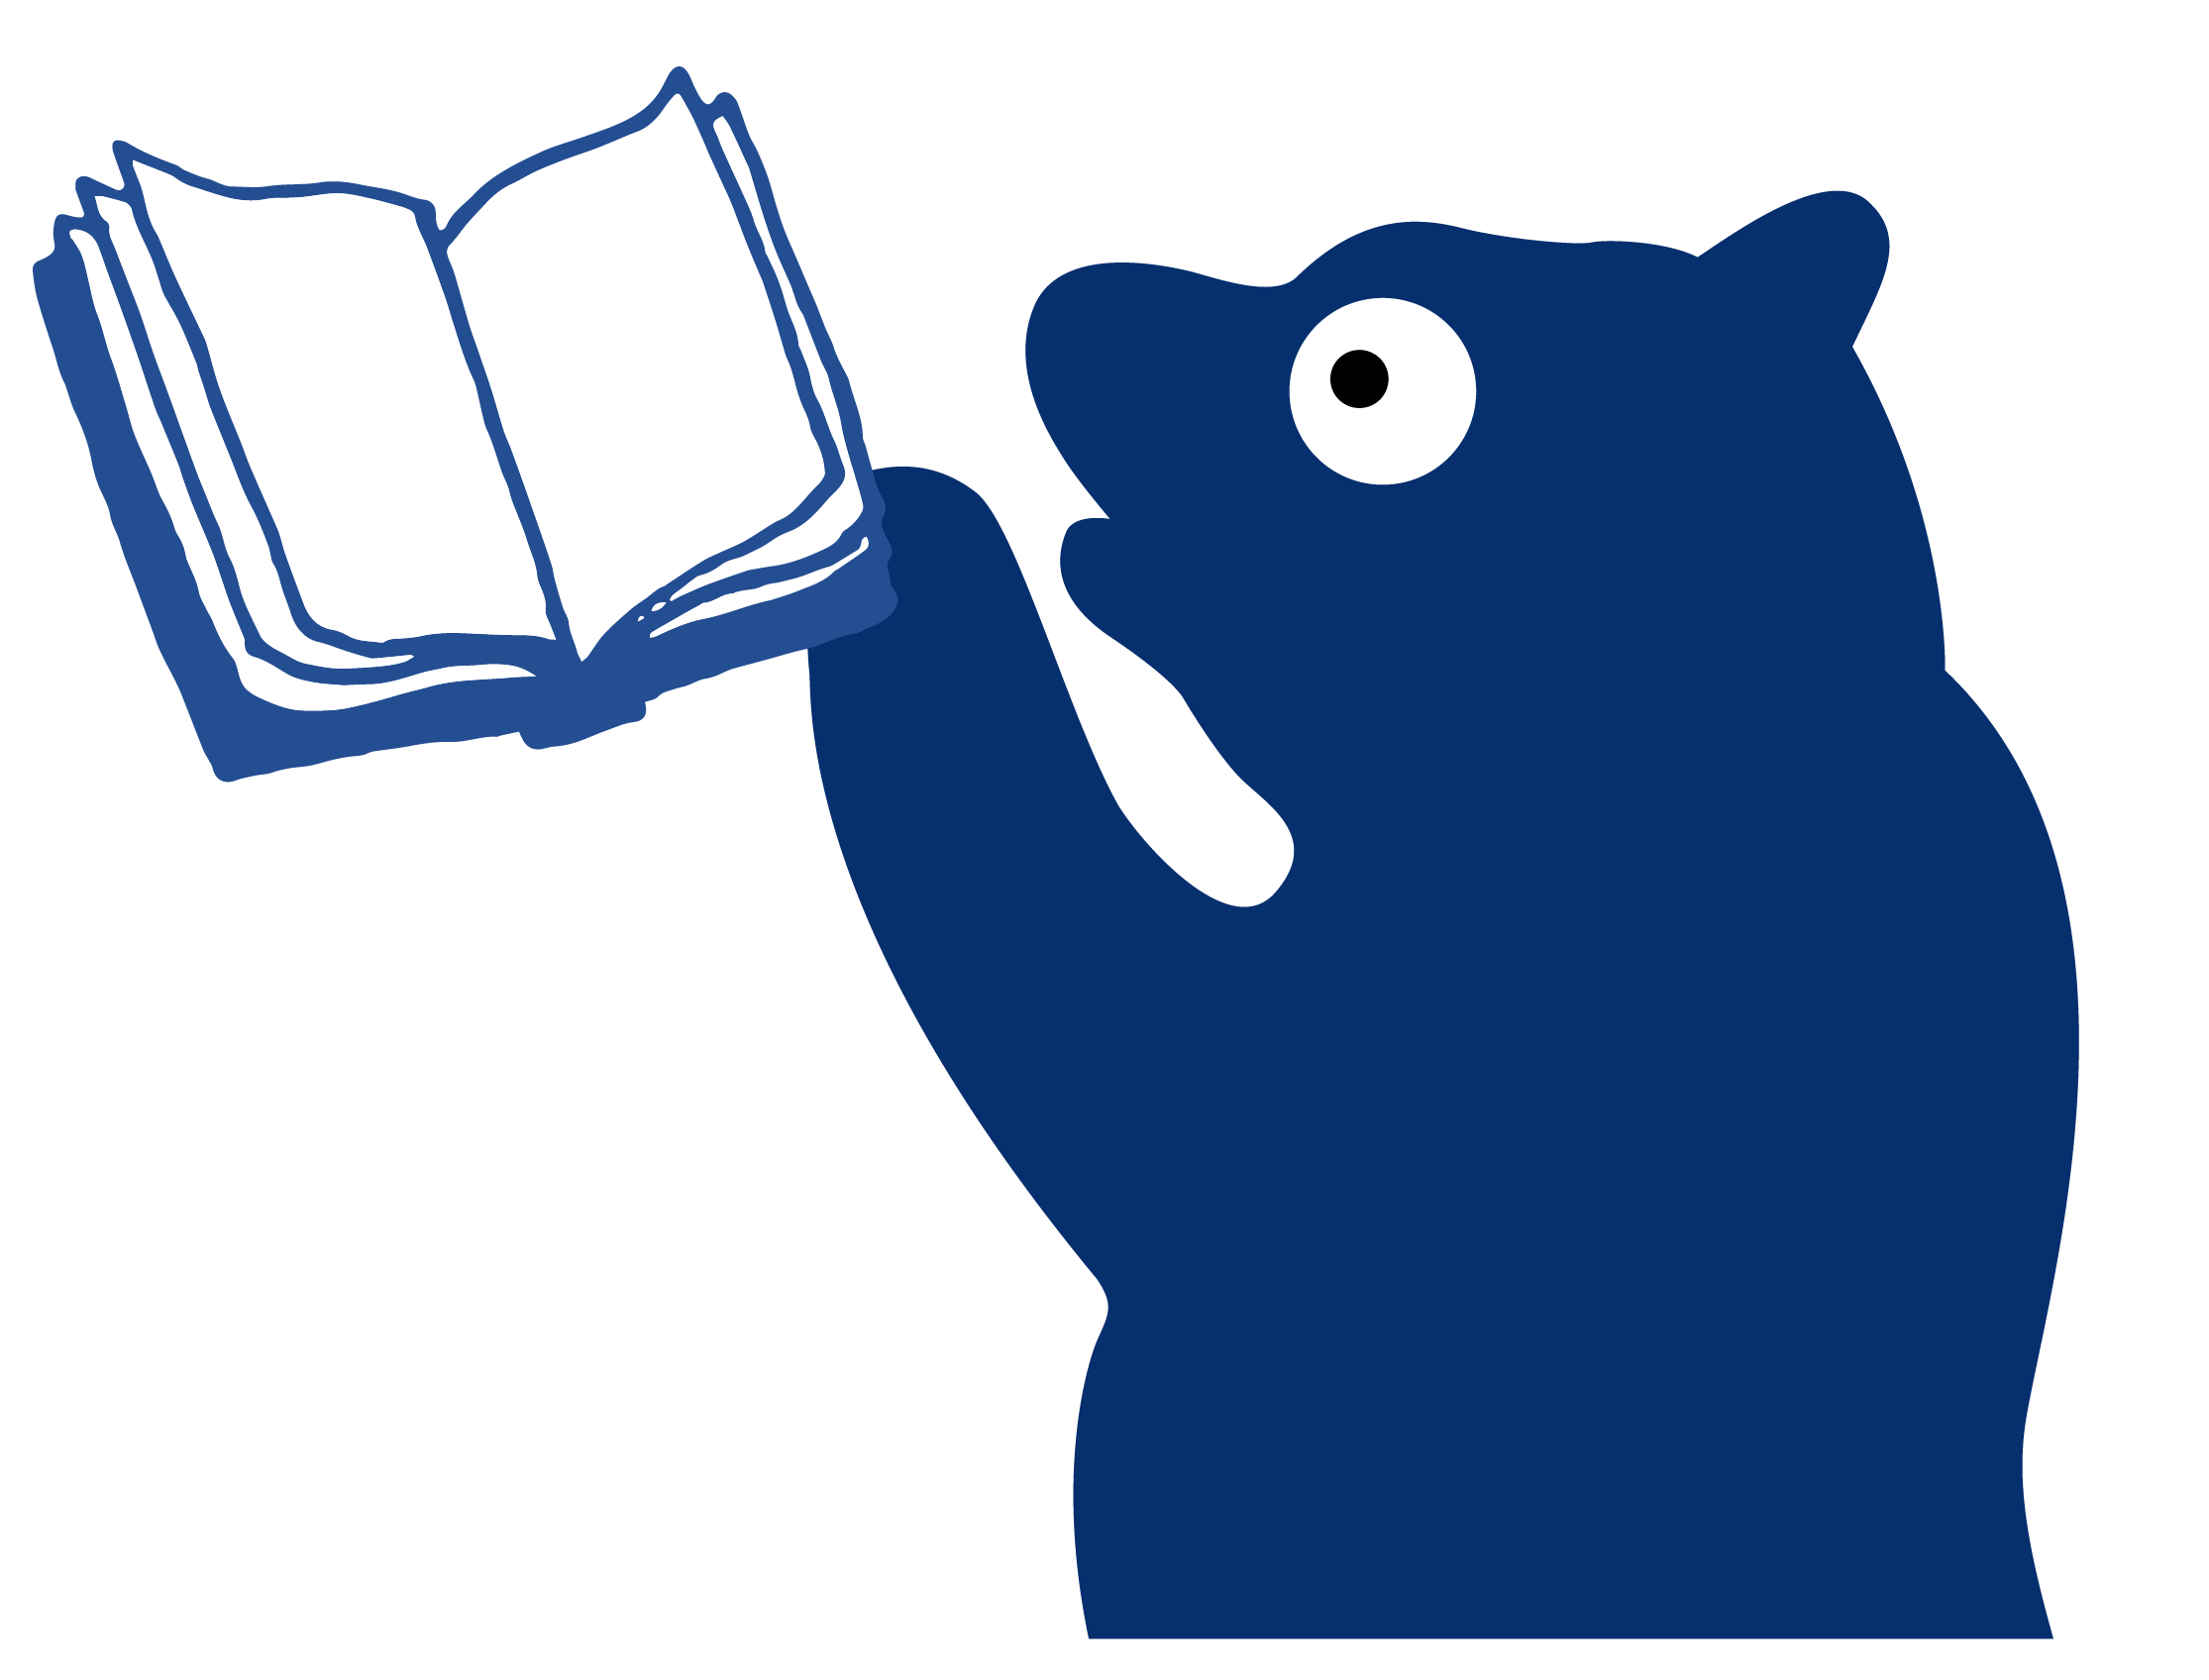 Millie the Bear holding a book